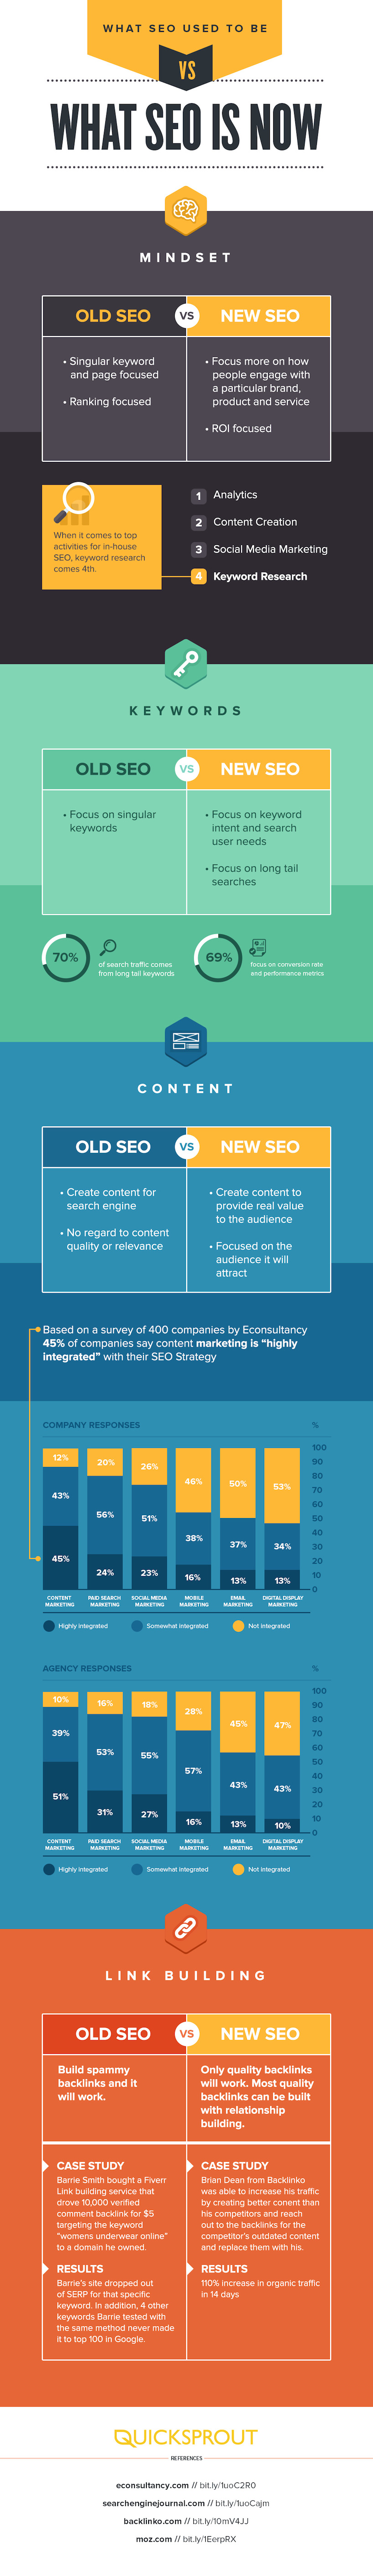 Quick Sprout 2014 infographic - What SEO Used To Be Versus What SEO Is Now